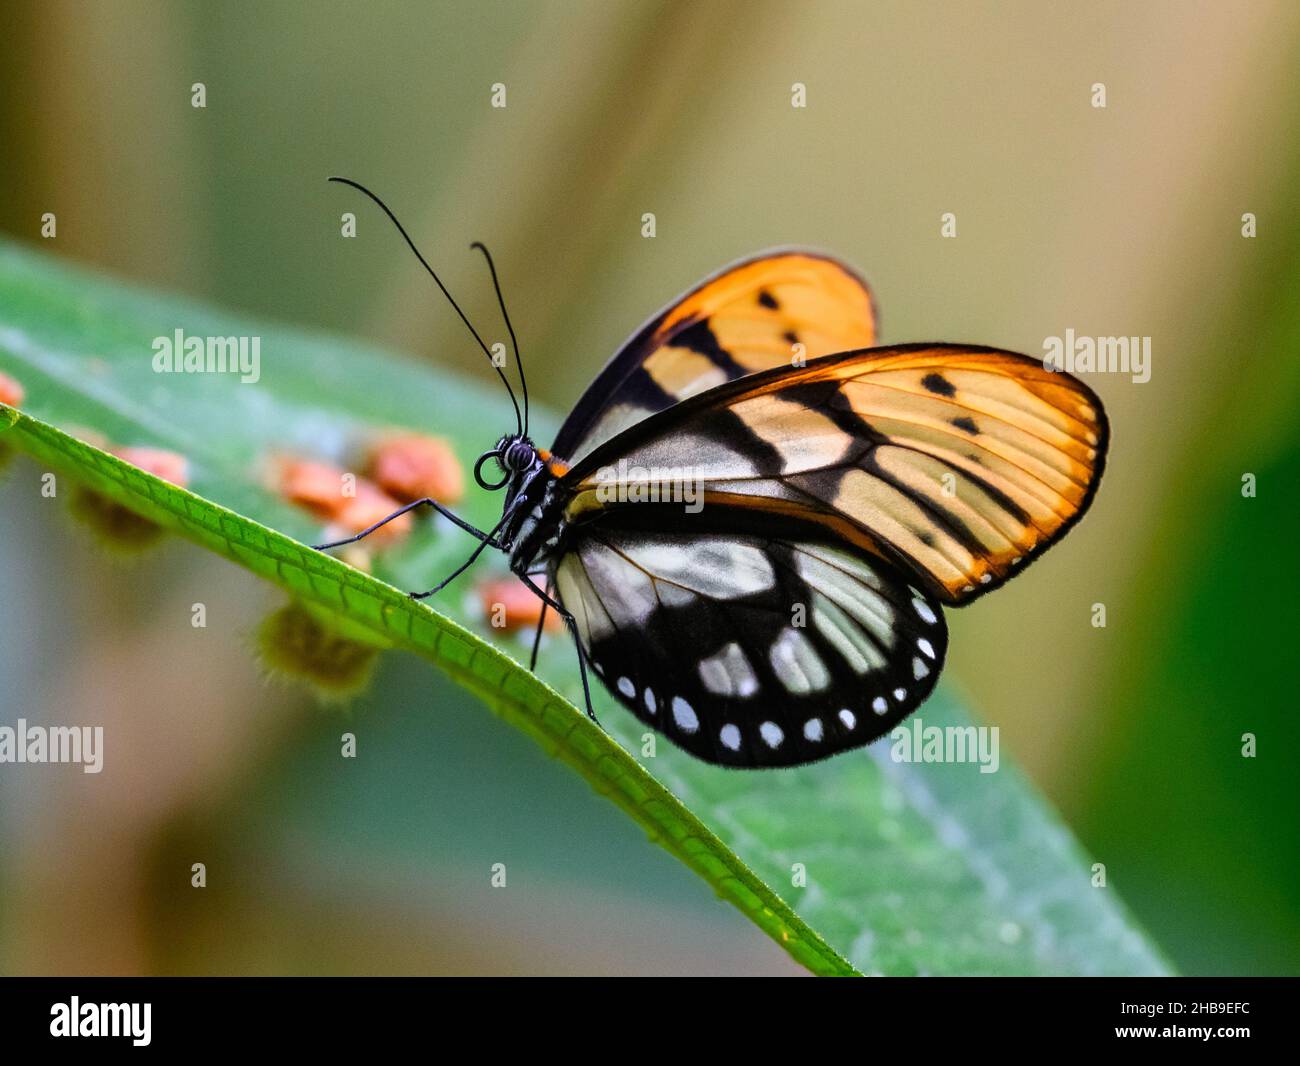 A Glasswing Butterfly (Ithomia sp.) on a leaf. Ecuador, South America. Stock Photo